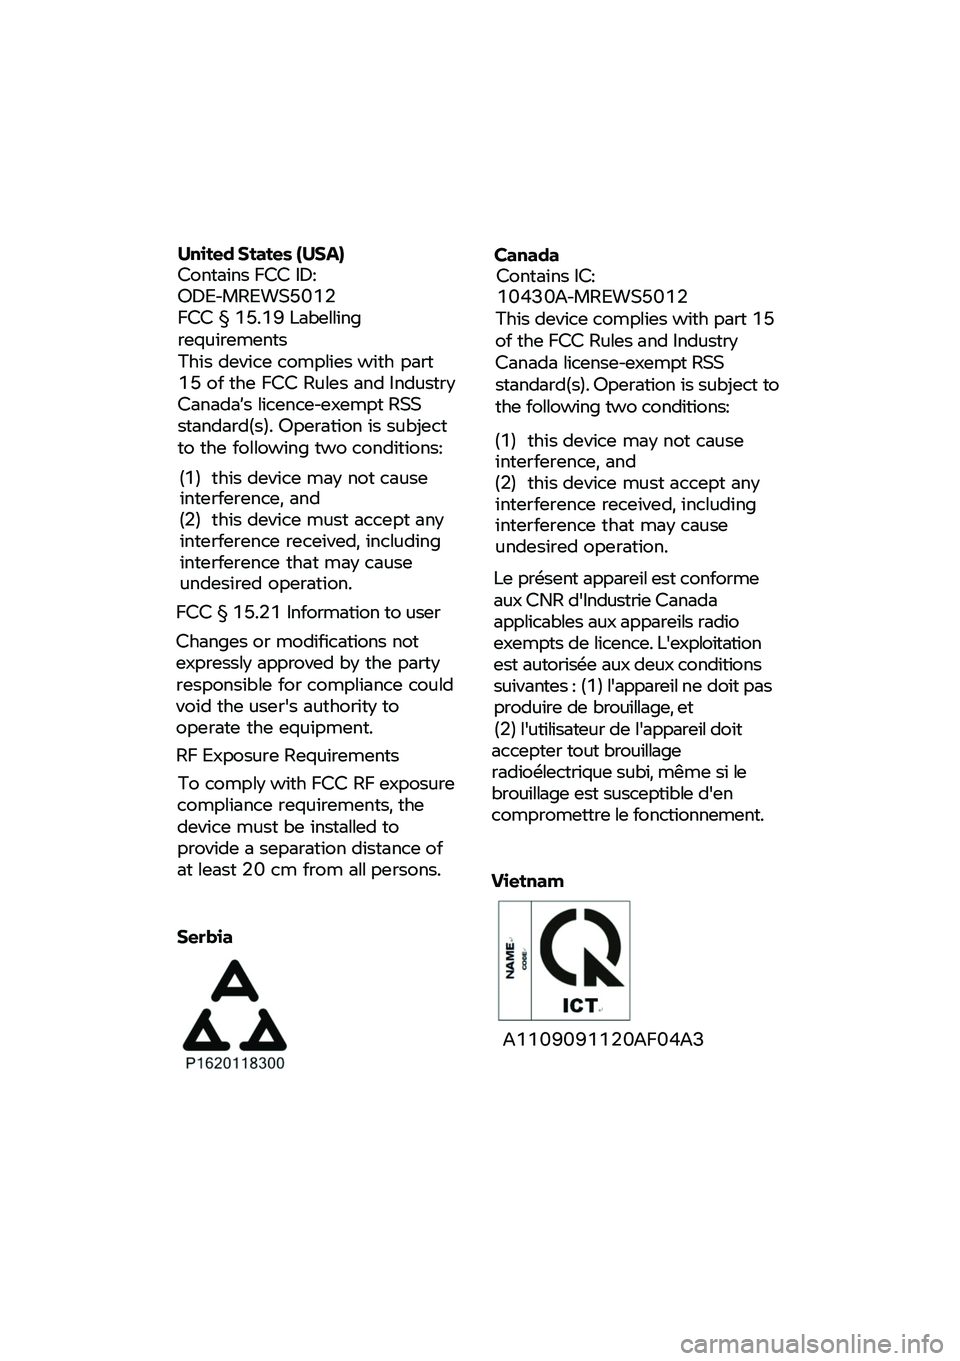 BMW MOTORRAD CE 04 2021  Betriebsanleitung (in German)  
 
 
 
United States (USA) Contains FCC ID: ODE-MREWS5012 FCC § 15.19 Labelling requirements This device complies with part 15 of the FCC Rules and Industry Canada’s licence-exempt RSS standard(s)